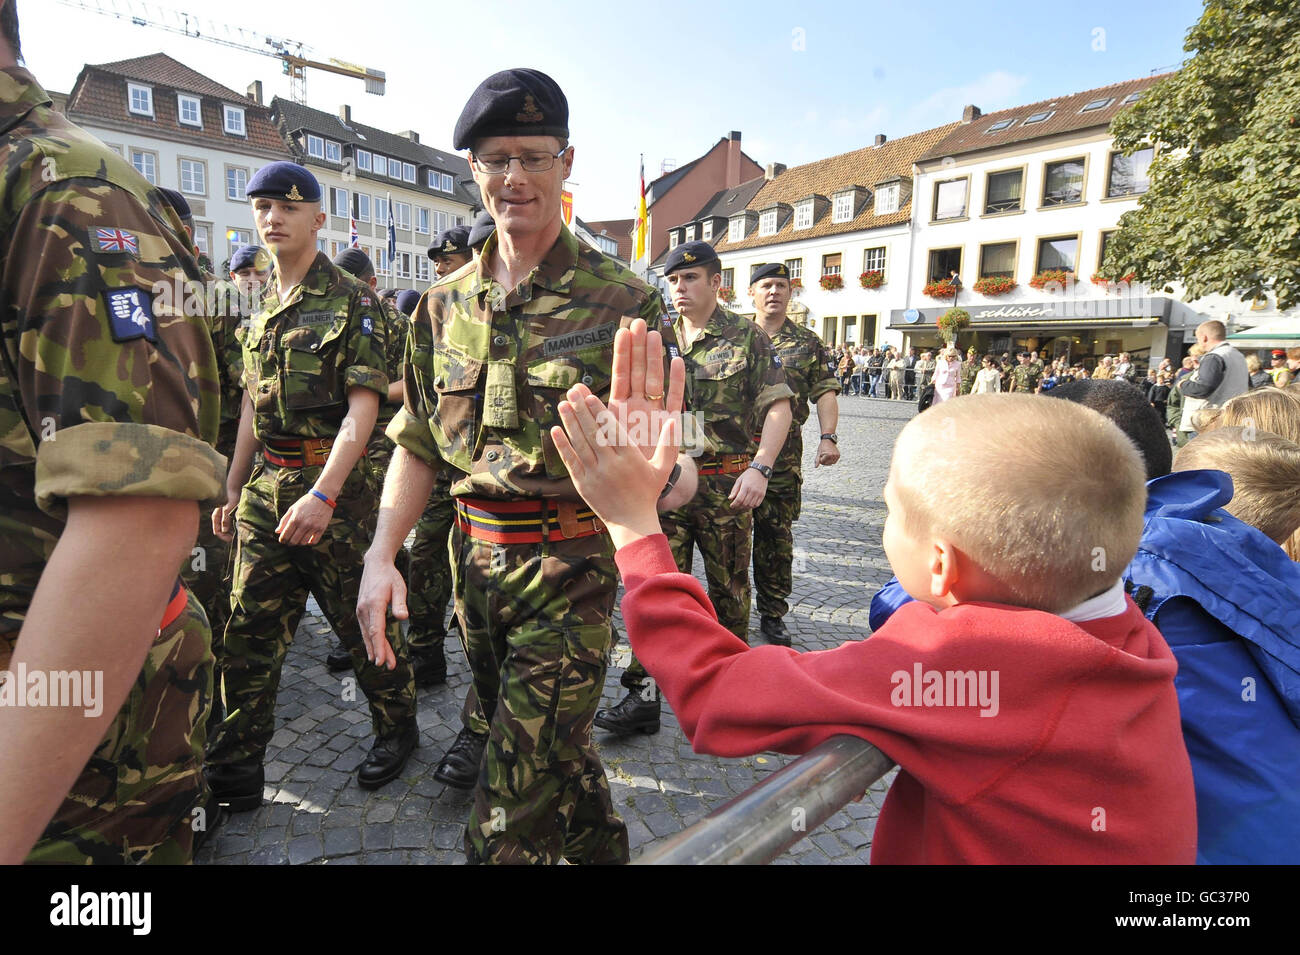 A small child gives a soldier a 'high five' after 'falling out' from parade and soldiers head off for a church service as over 500 soldiers from 20th Armoured Brigade - the Iron Fist, mark their return from operations in Iraq, Afghanistan and Kosovo by parading through their Garrison town of Paderborn in front of hundreds of spectators from both the local German community and soldier's families and friends. Stock Photo